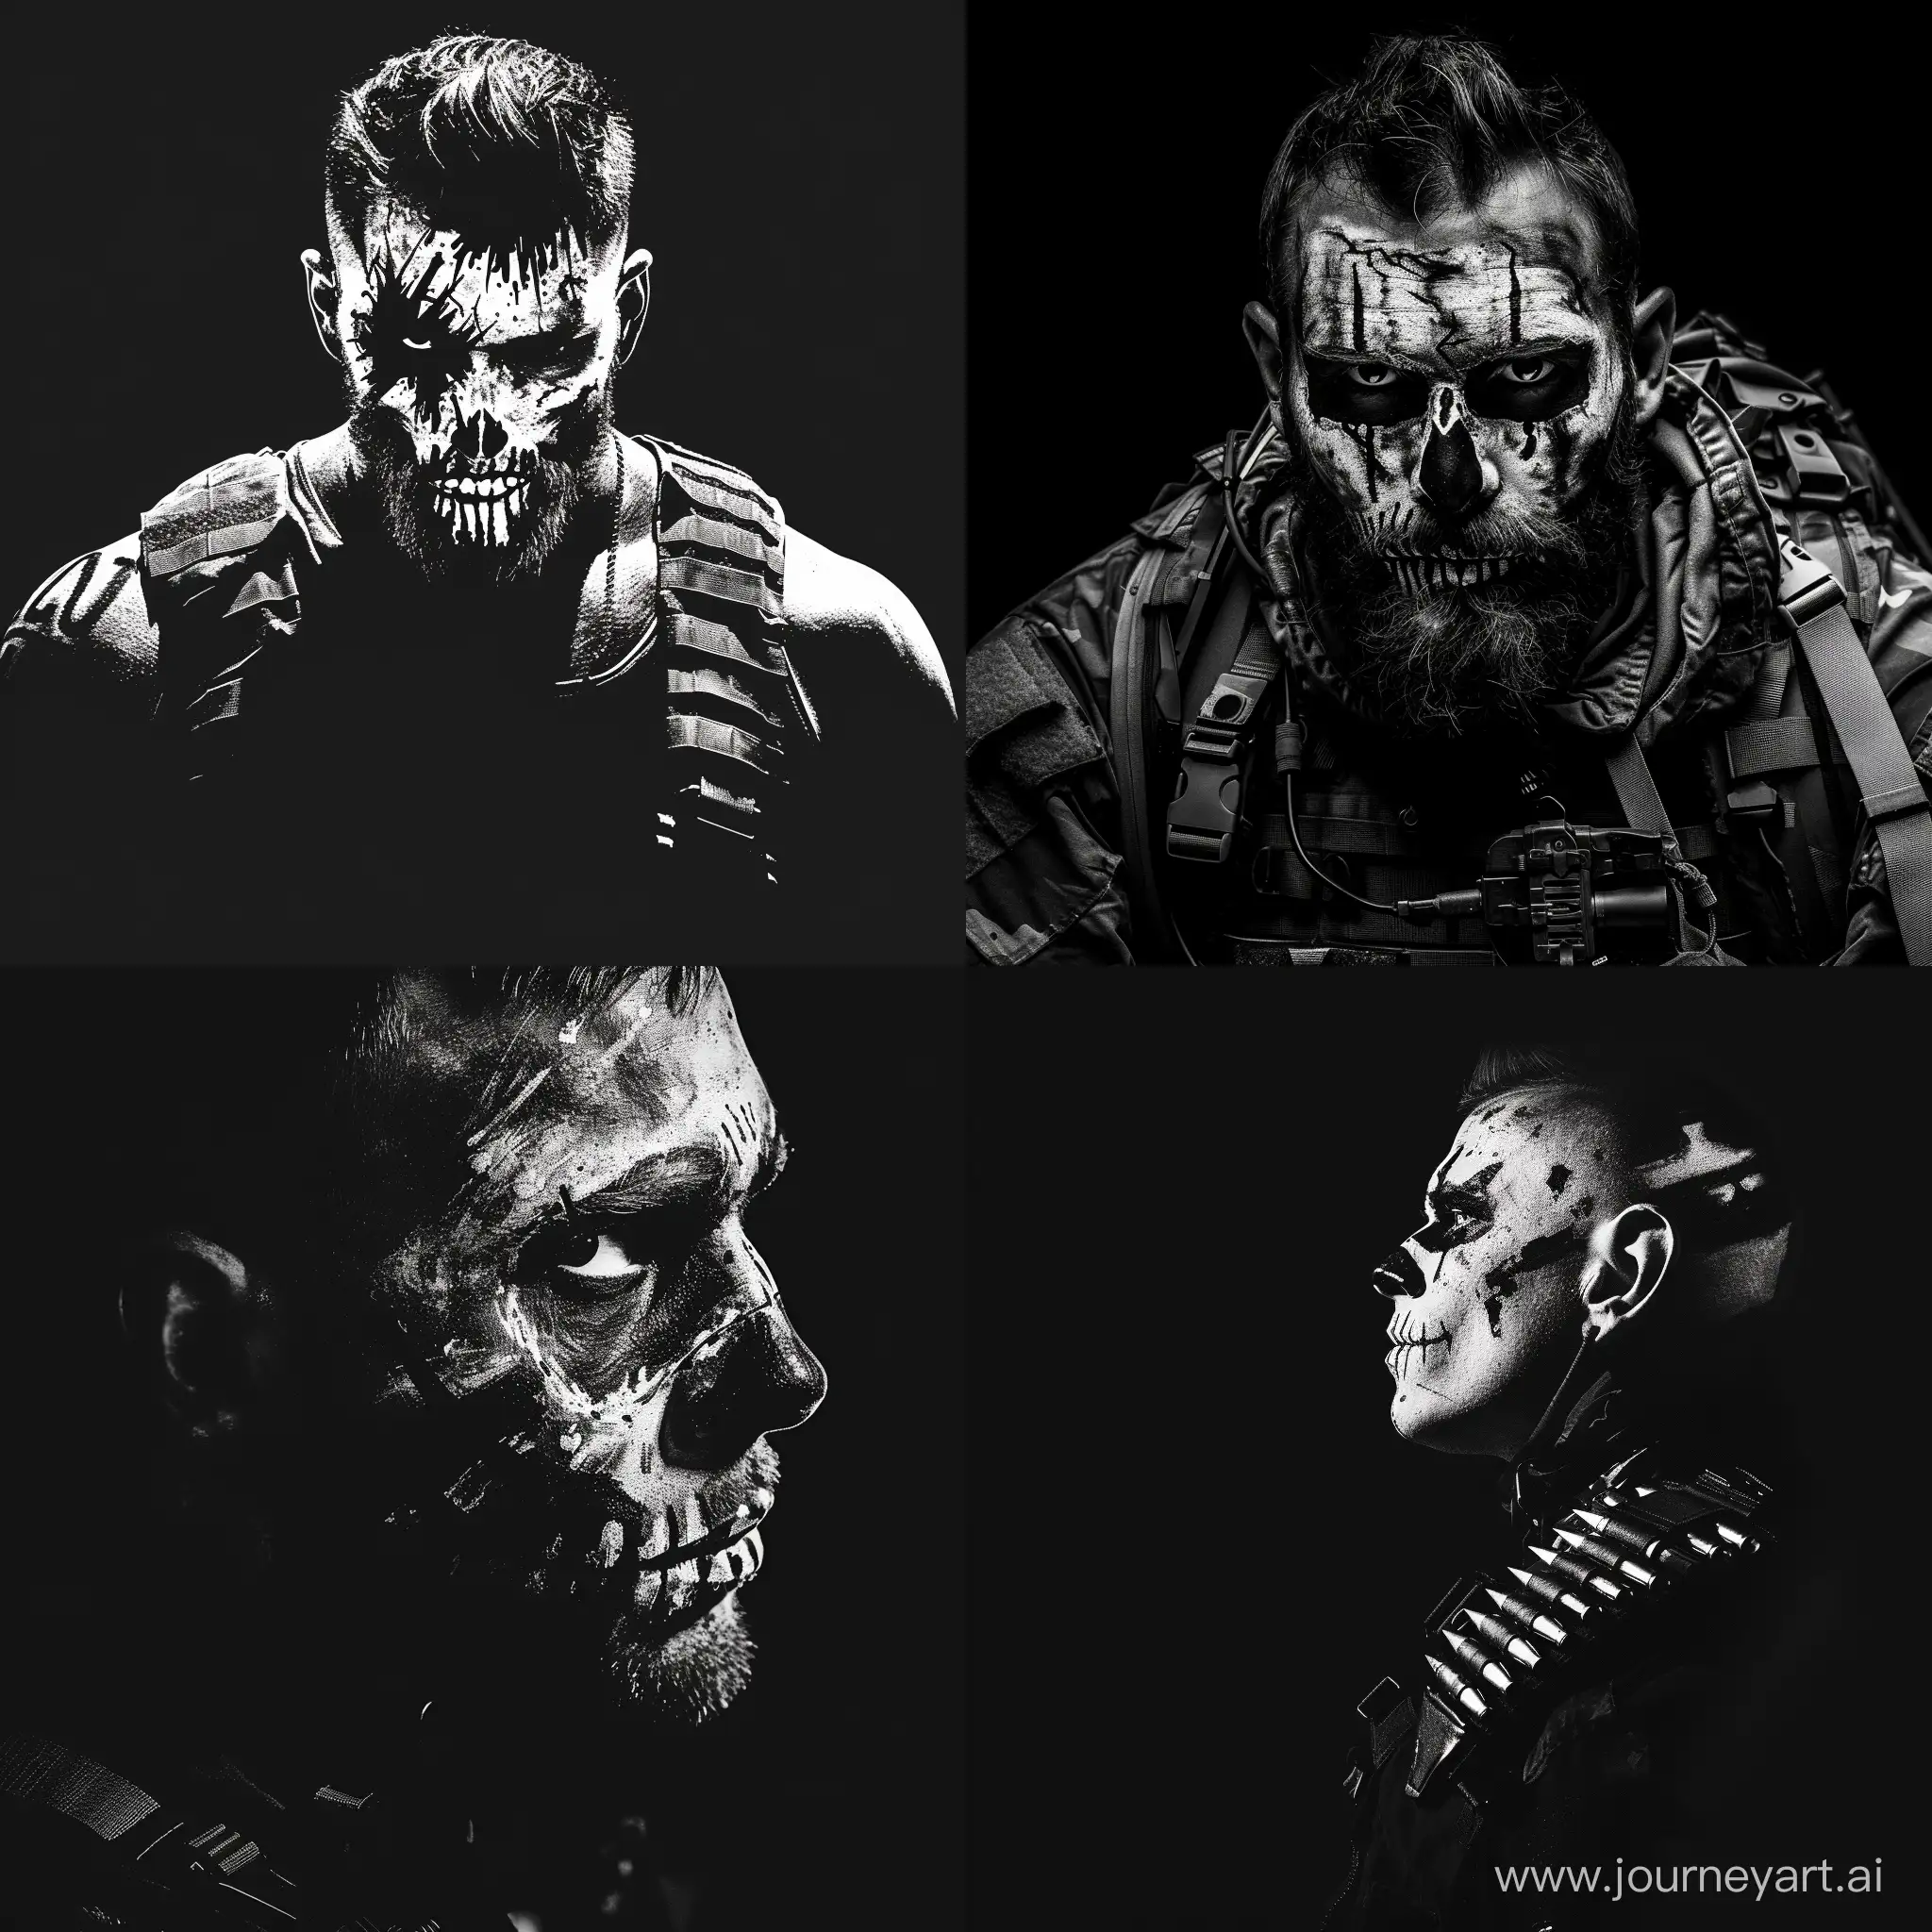 Minimalistic-Man-with-Crude-Skull-War-Paint-and-Military-Equipment-on-Black-Background